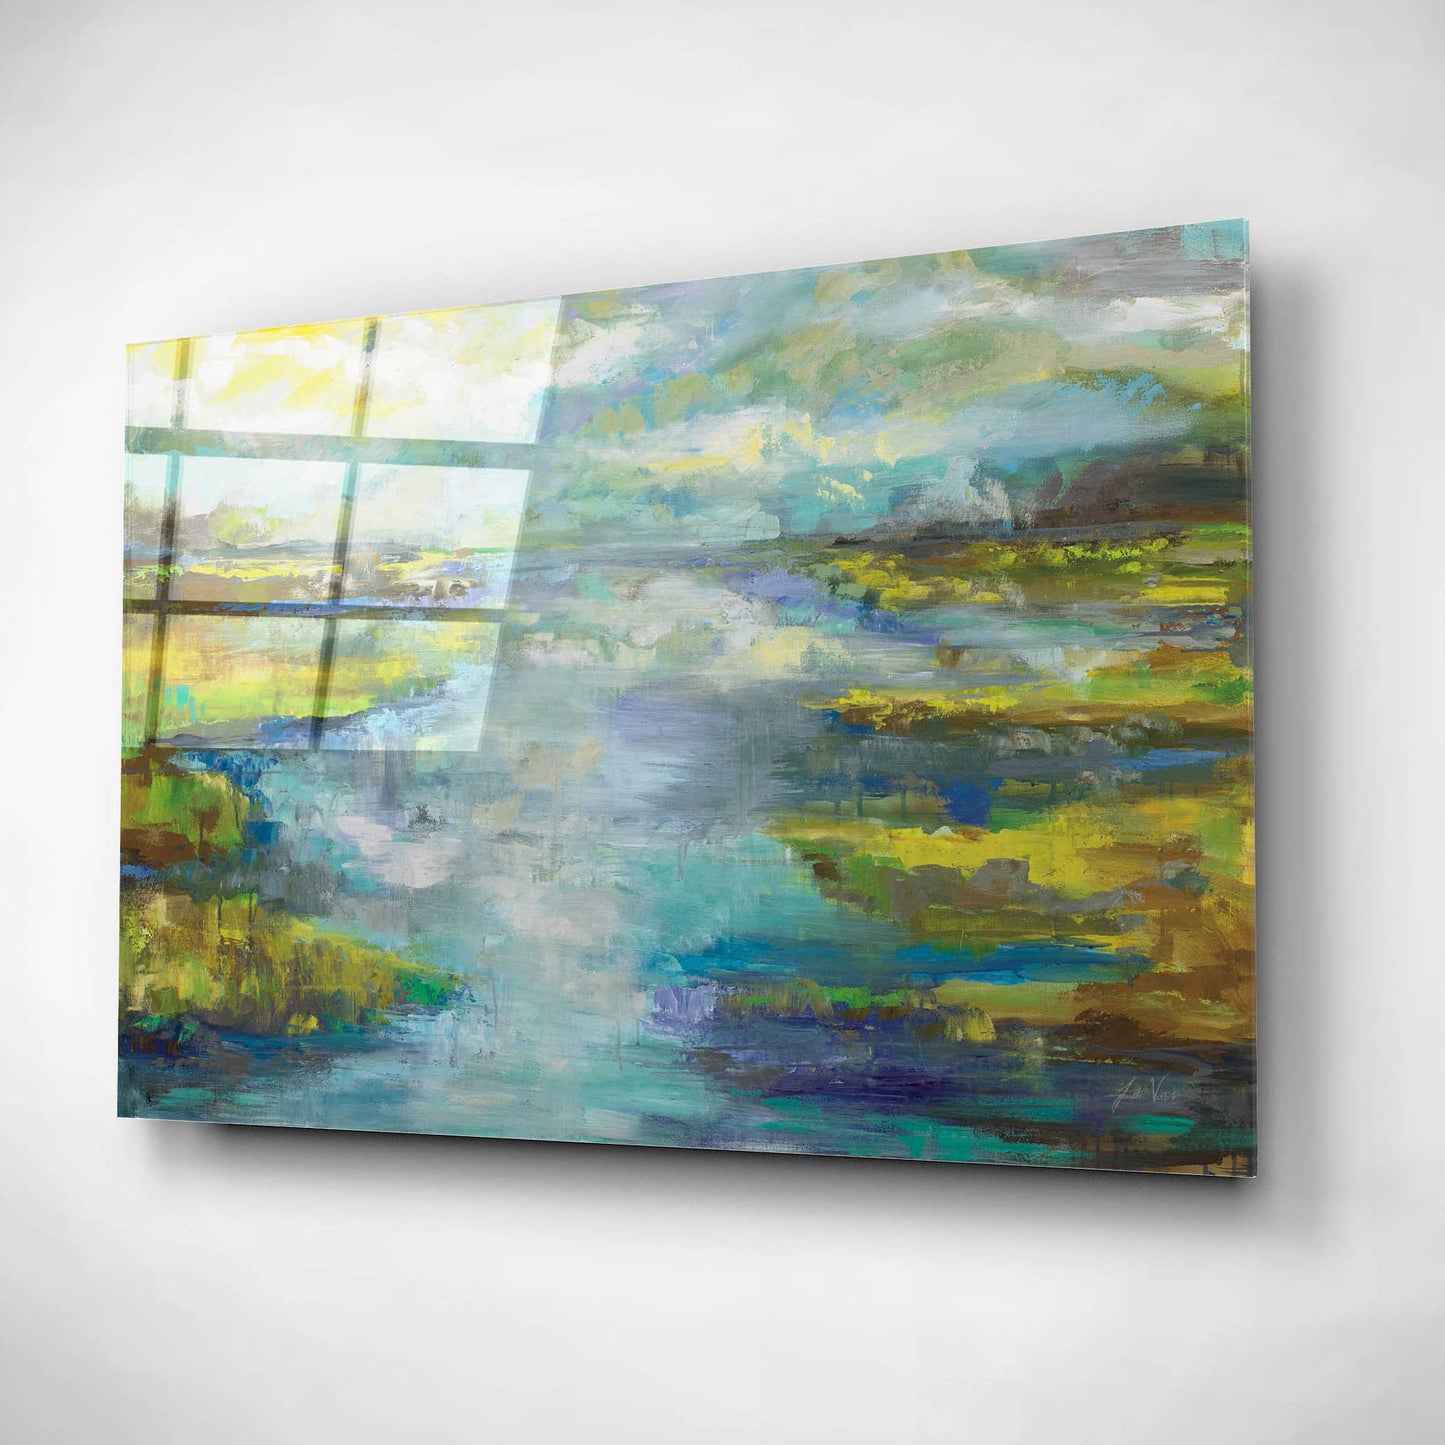 Epic Art 'Quietude' by Jeanette Vertentes, Acrylic Glass Wall Art,16x12